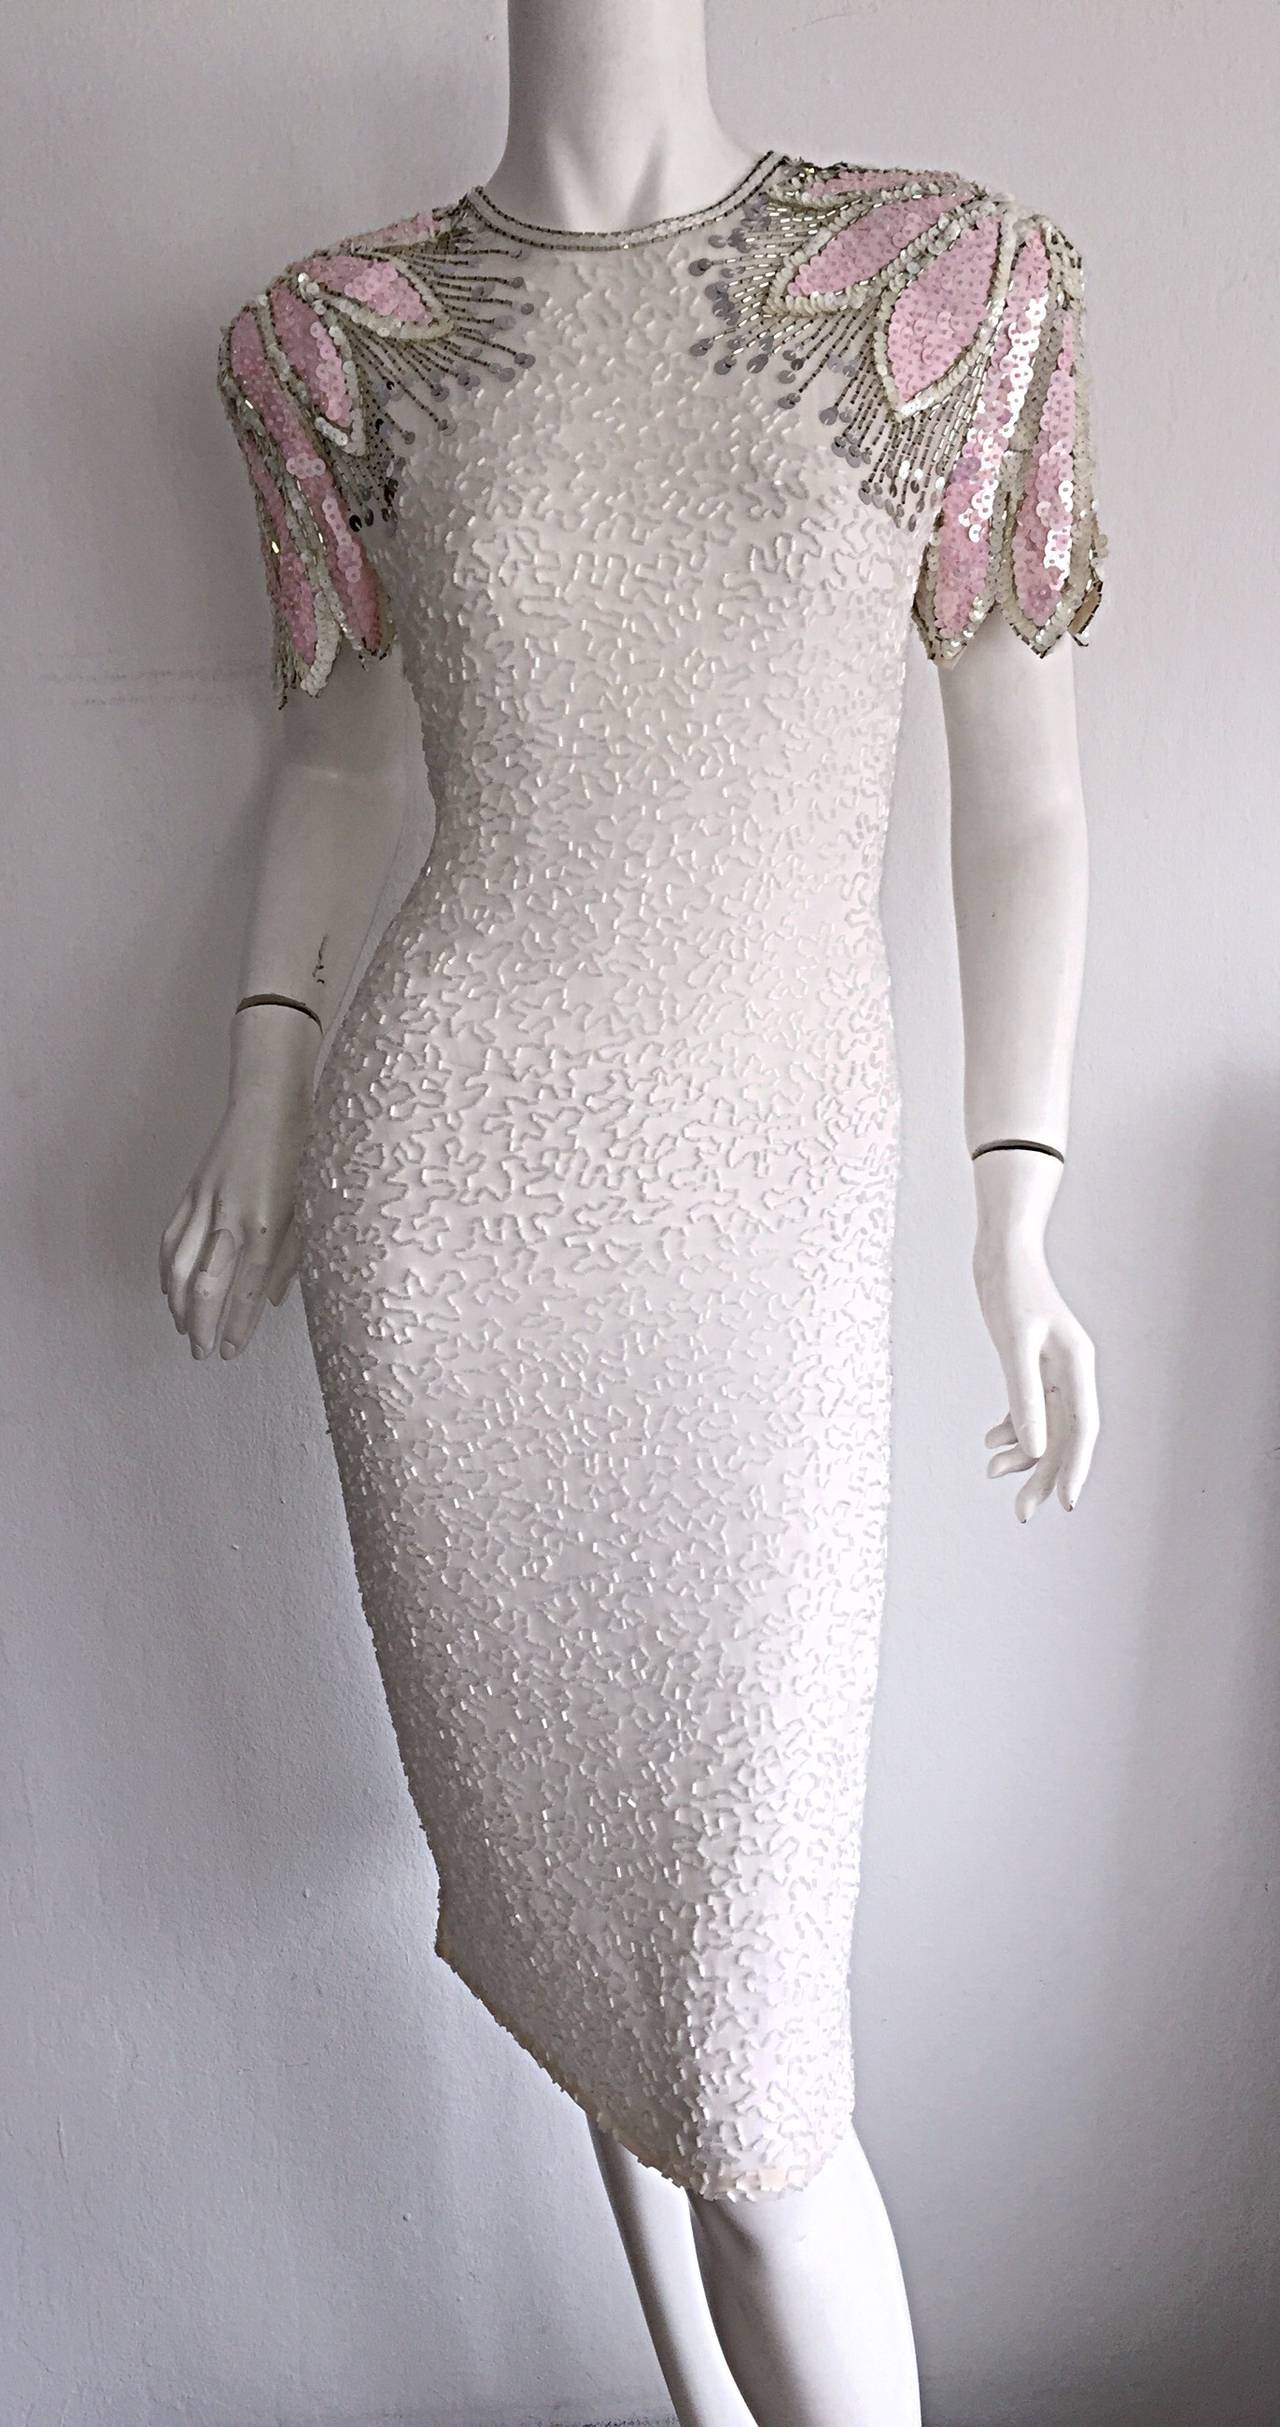 Stunning Vintage White + Pink + Silver Beaded Sequin Illusion Dress w/ Open Back 2